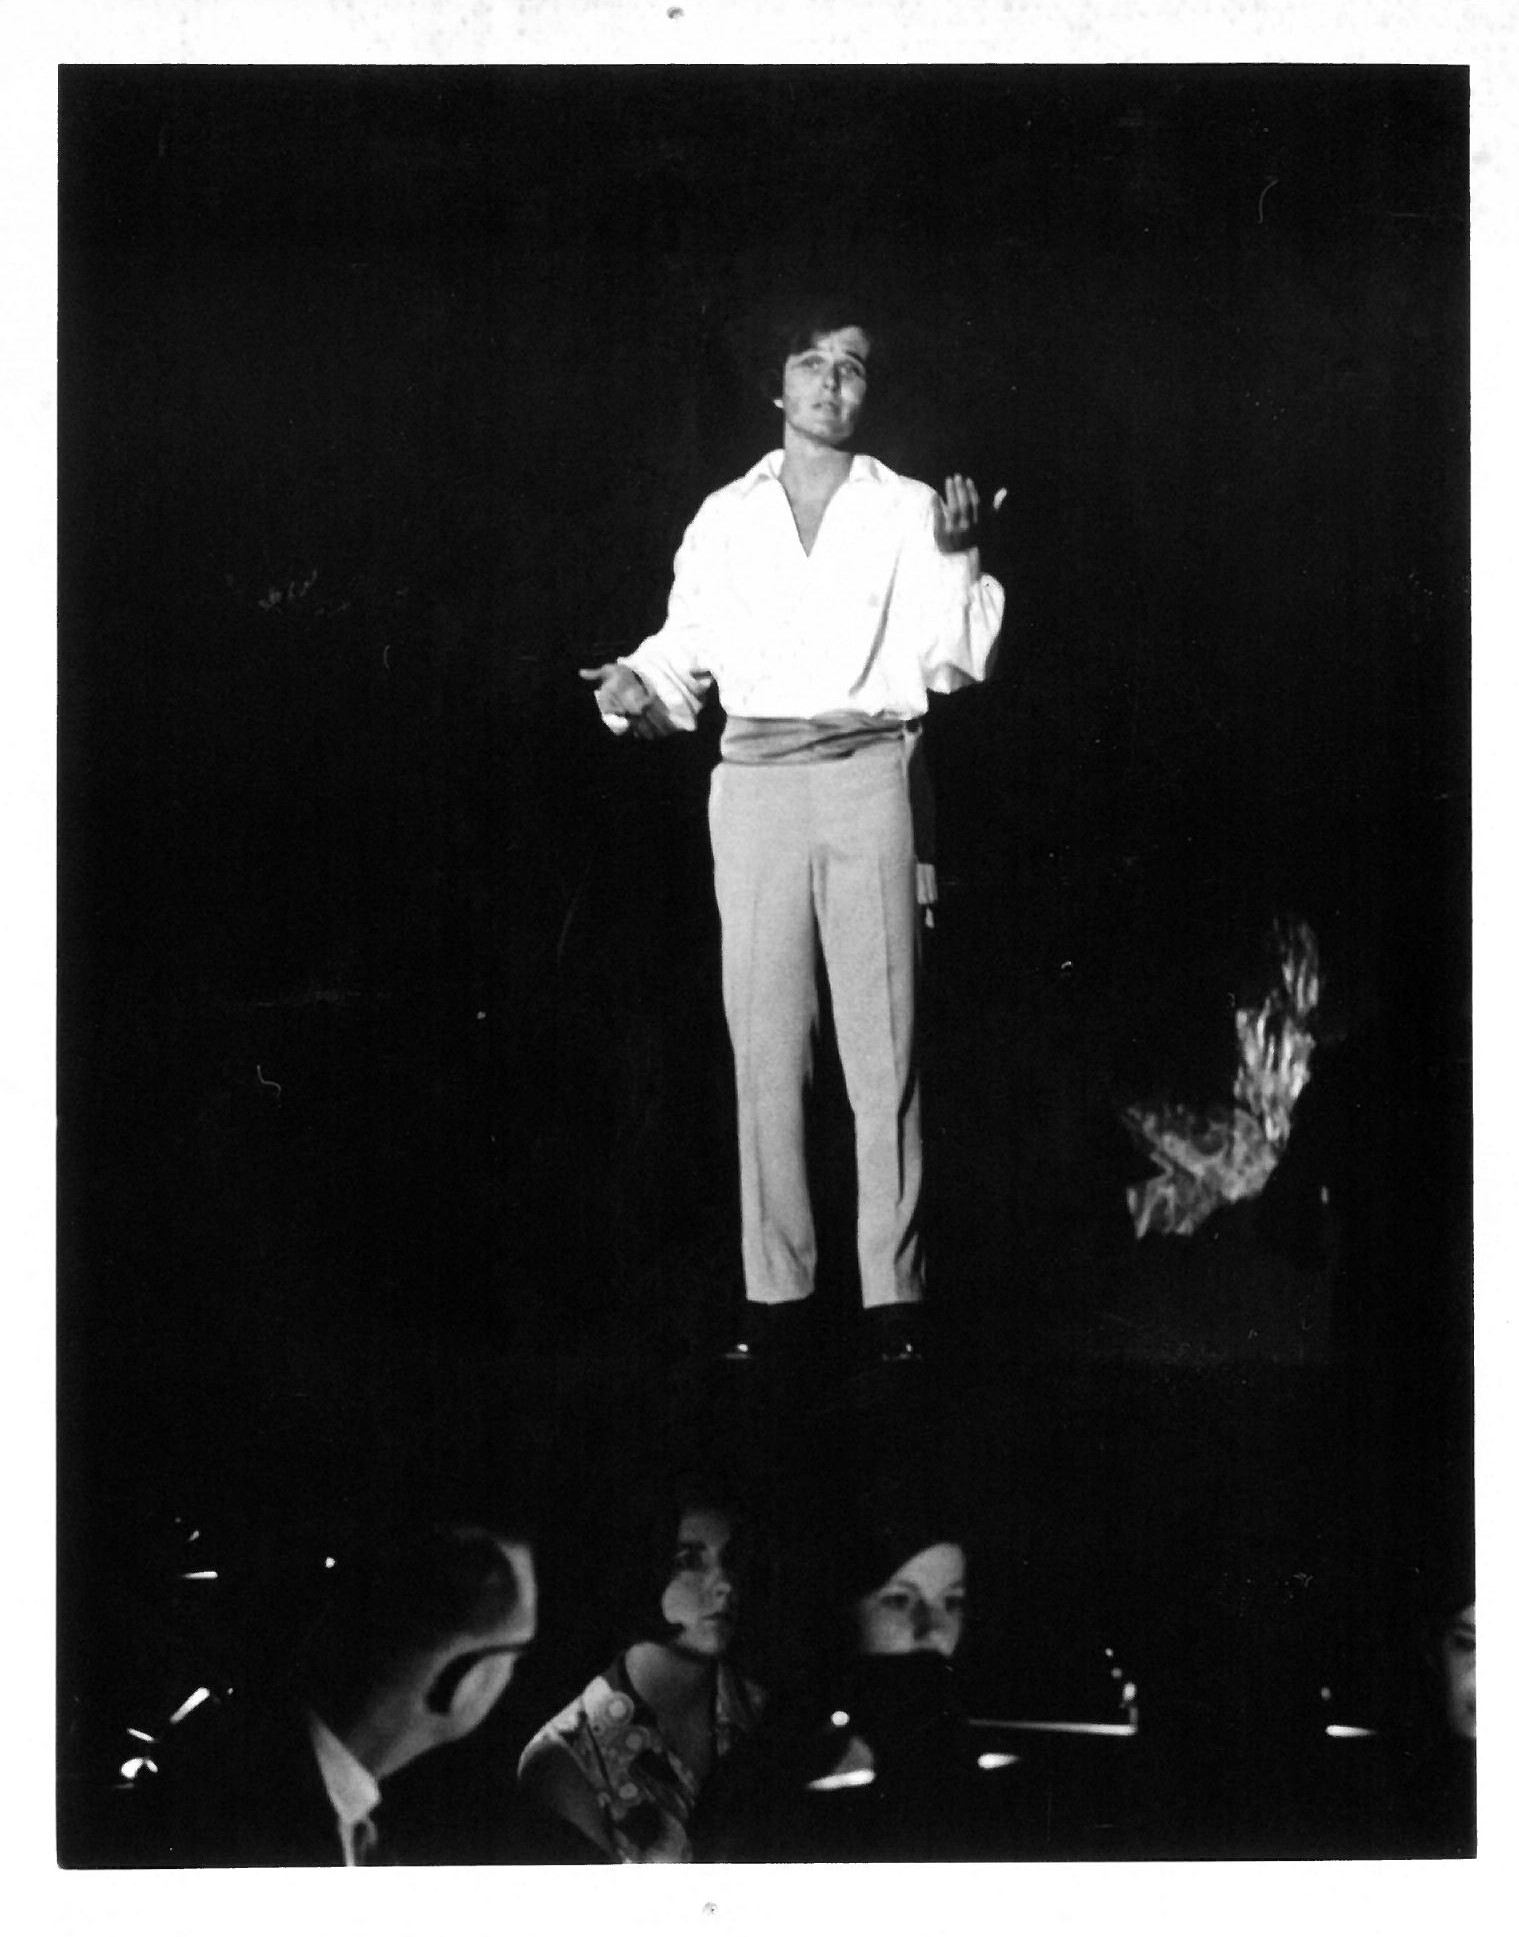 Wheaton College IL Mike Stauffer performs monologue in On A Clear Day theater production 1970